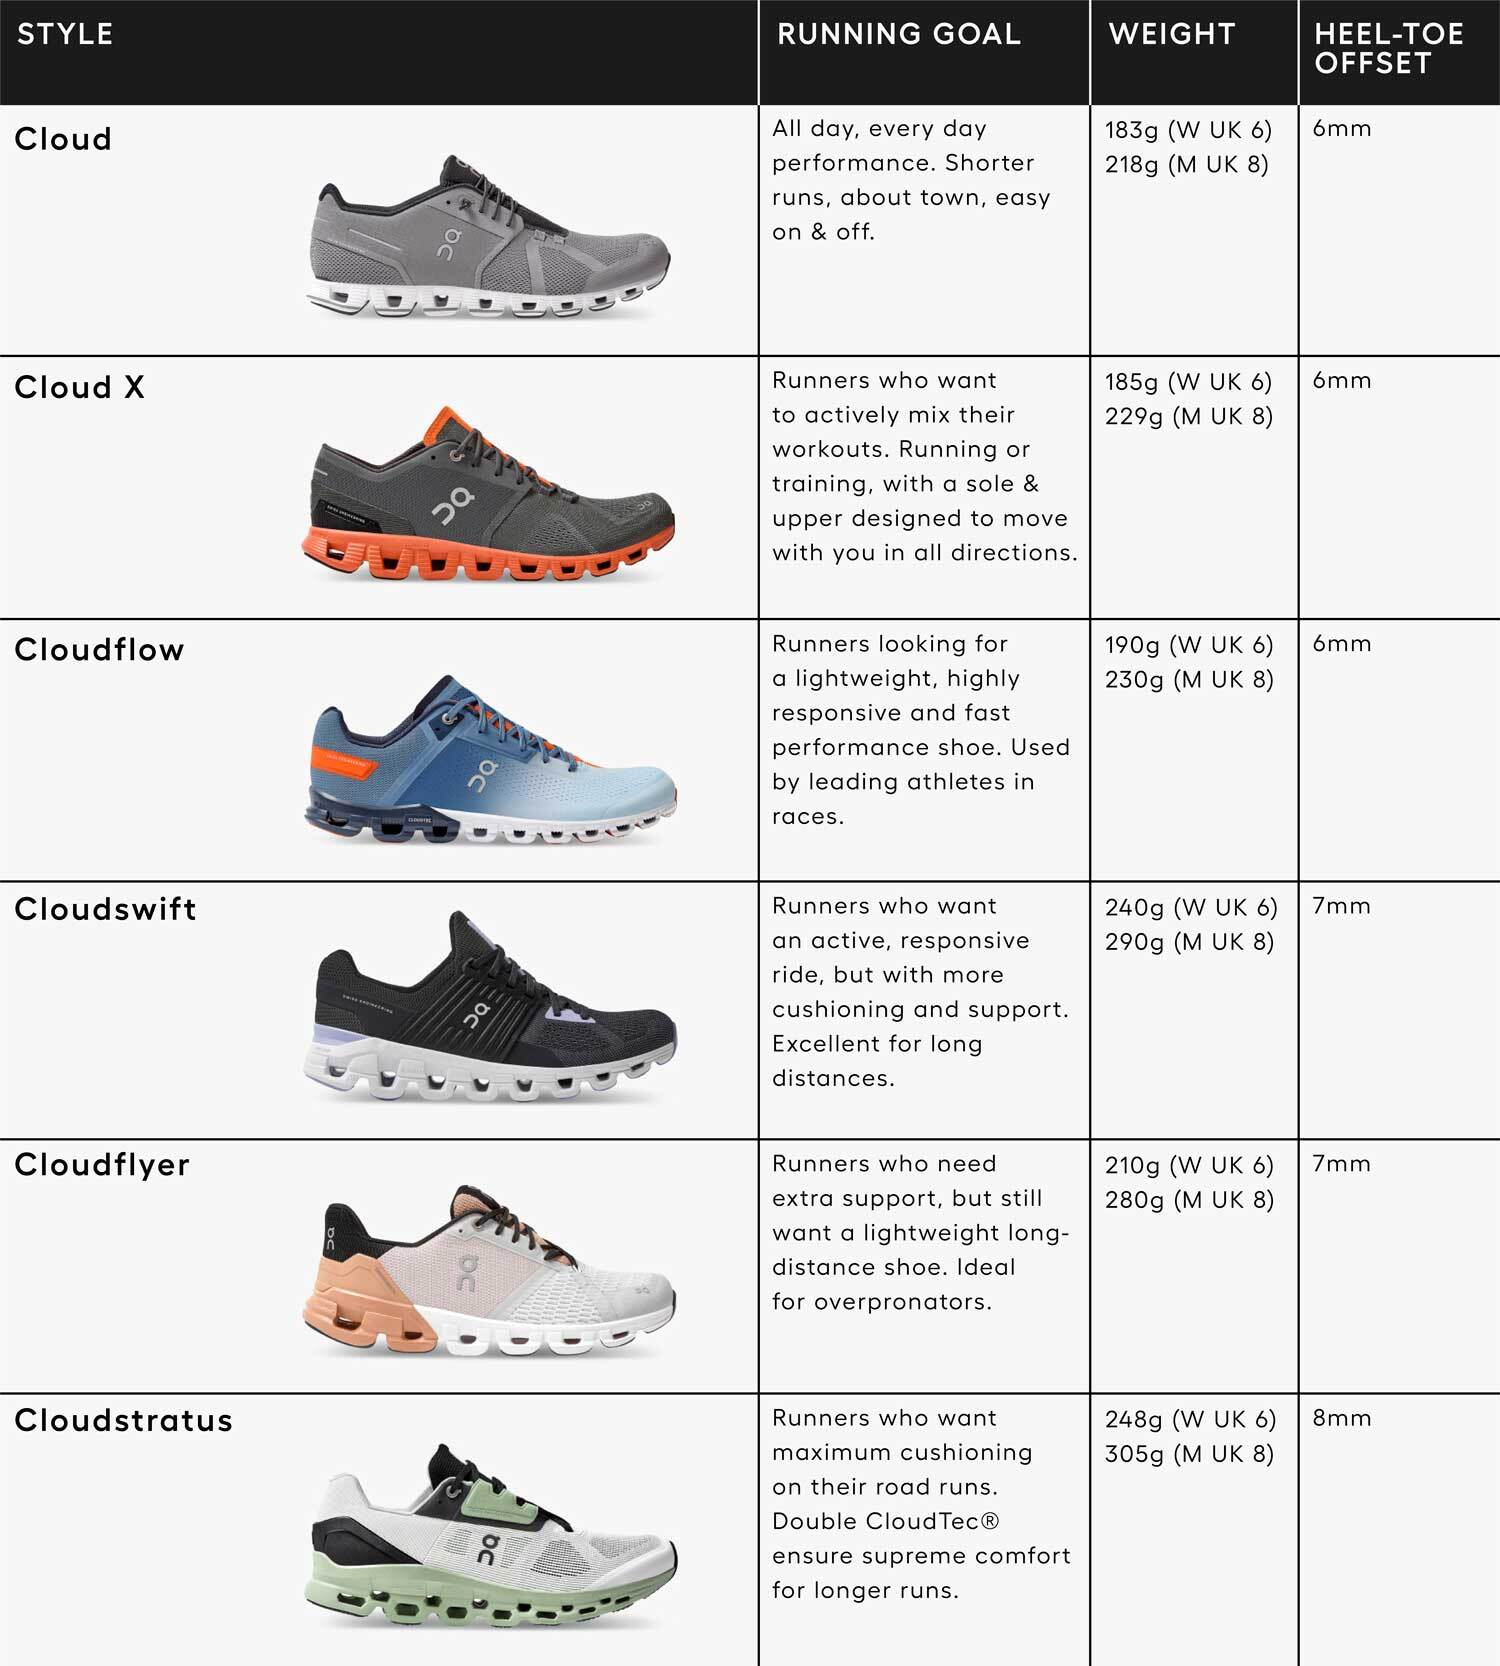 On Running Shoes Review | Cloud, Cloud X, Cloudflow | The Sports Edit